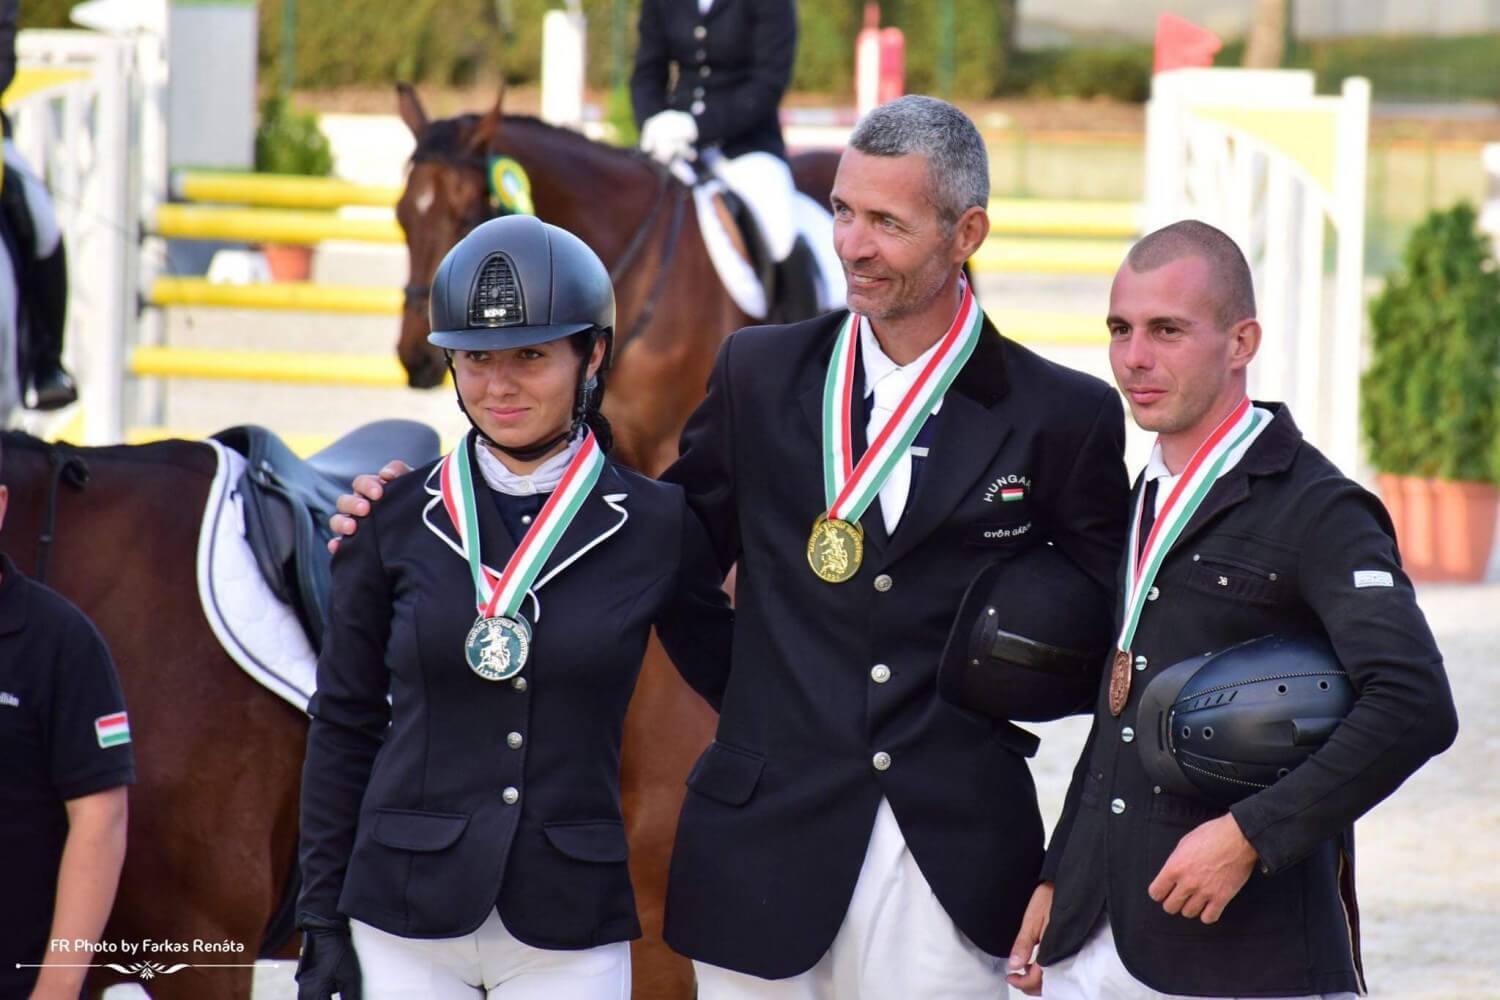 Succefully Nationals CCI3*-S in Babolna, Hungary